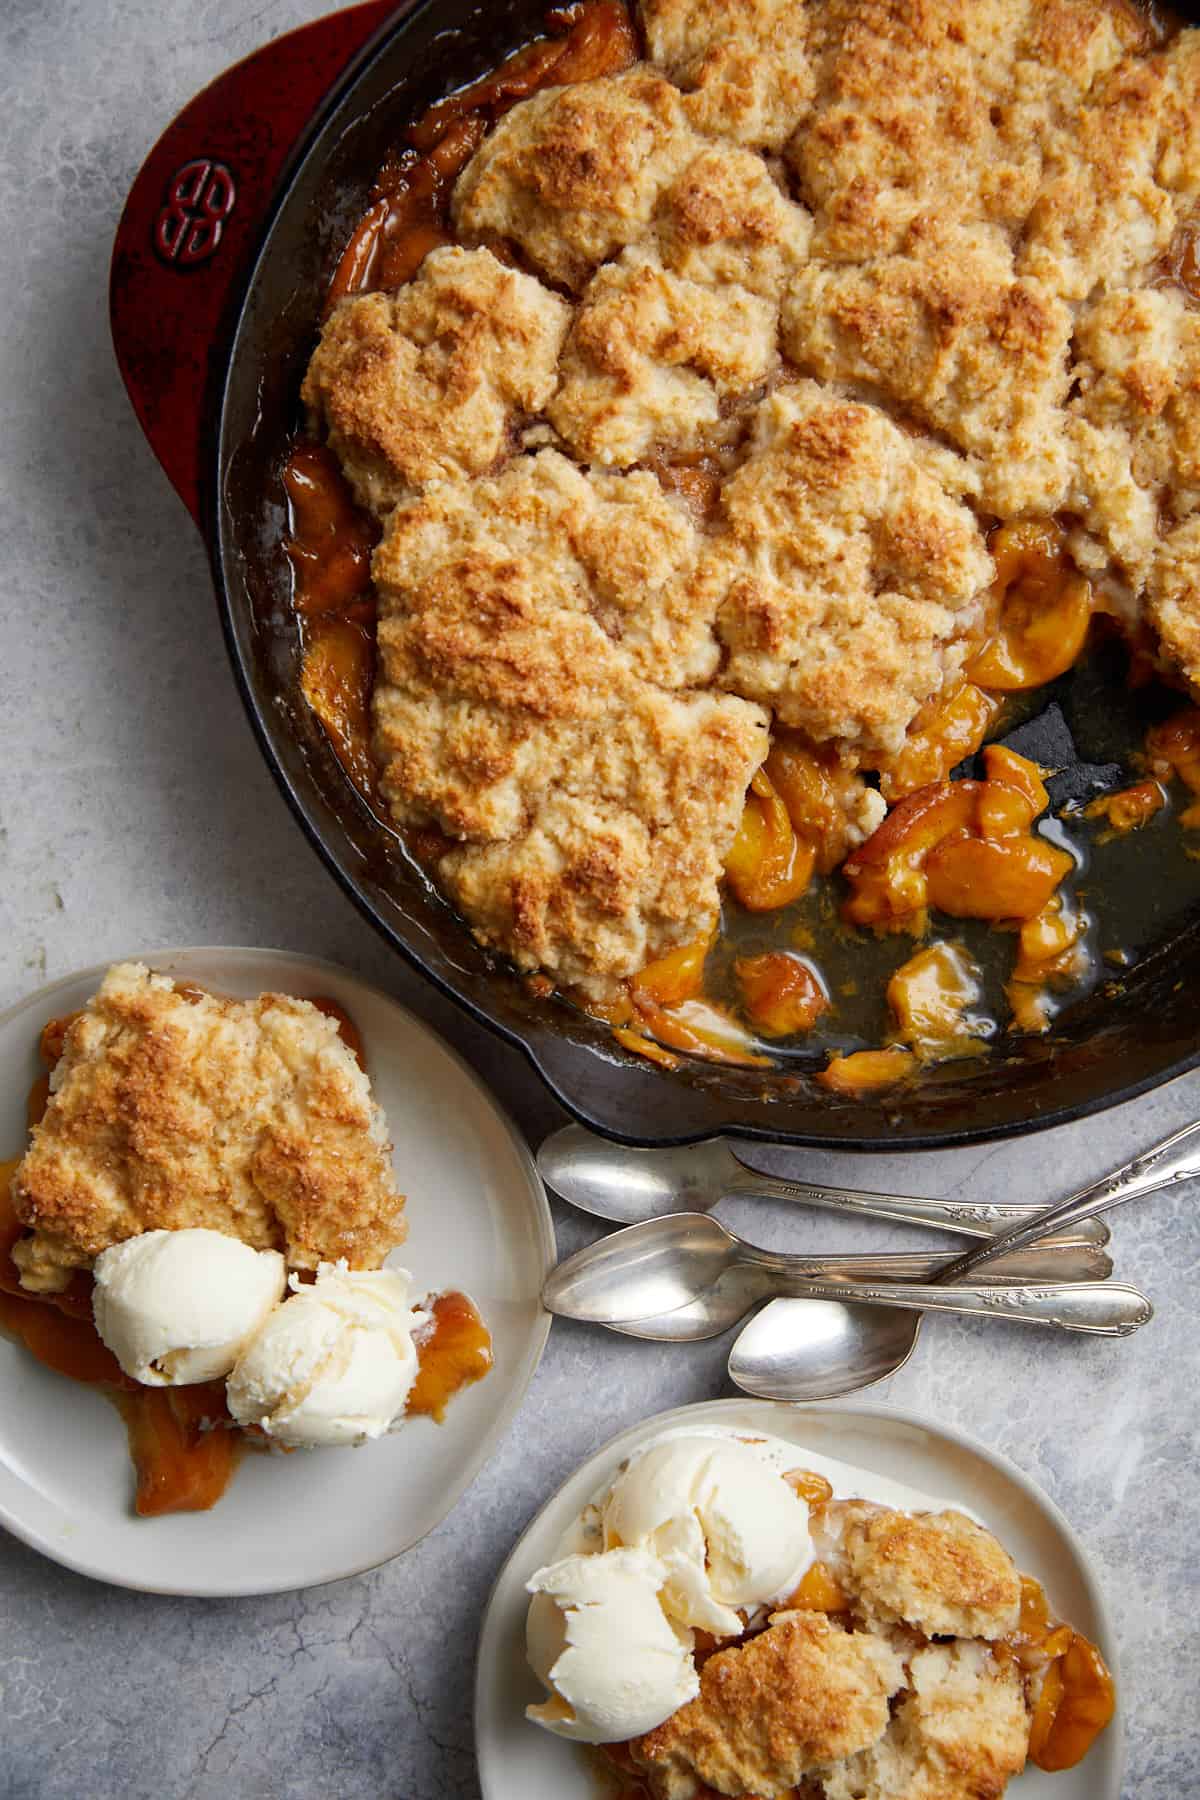 looking down at the cast iron pan of peach cobbler with two plates with servings of the cobbler and ice cream along with a pile of spoons.